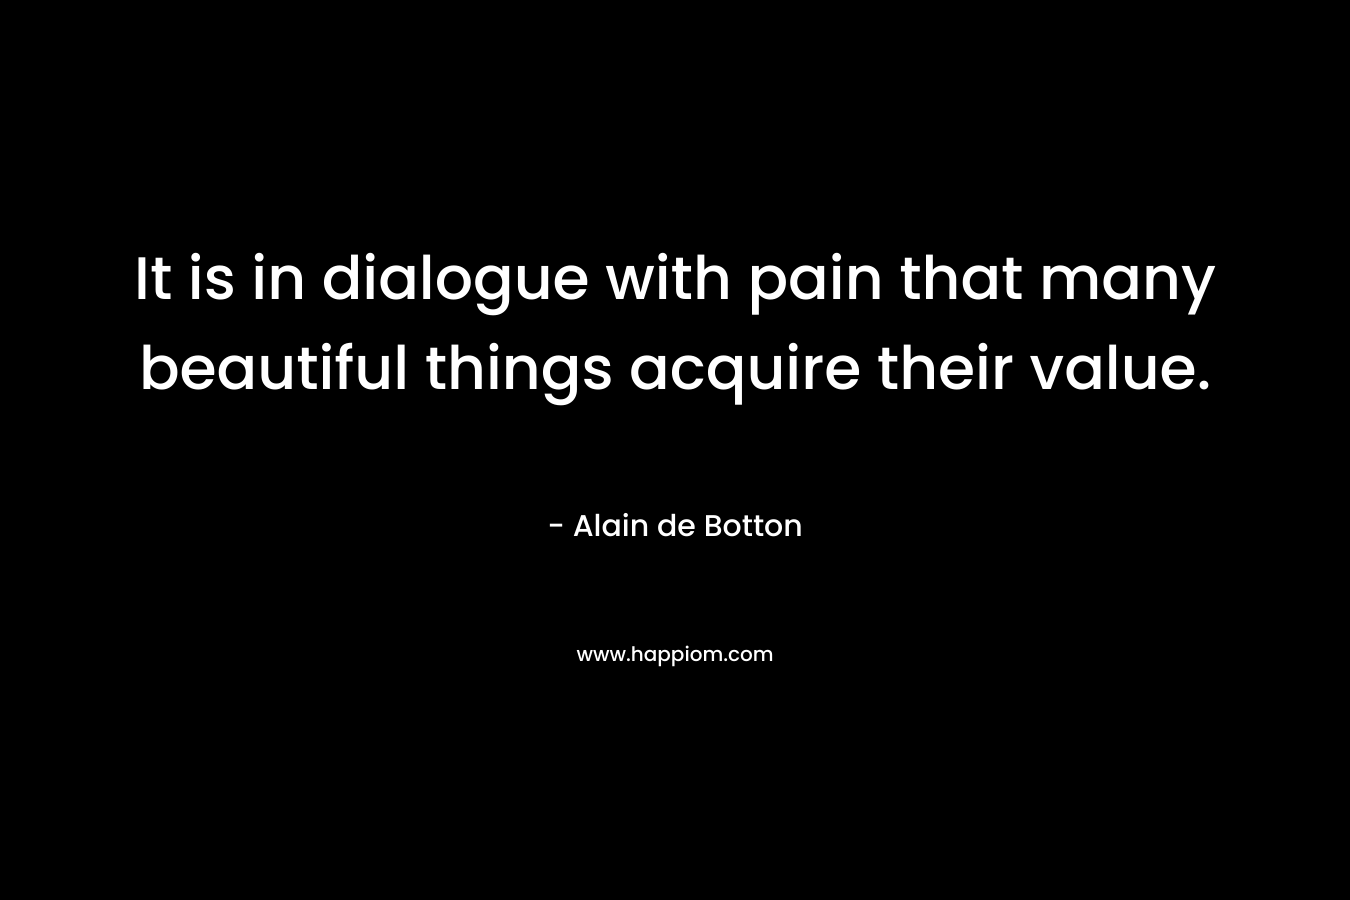 It is in dialogue with pain that many beautiful things acquire their value. – Alain de Botton